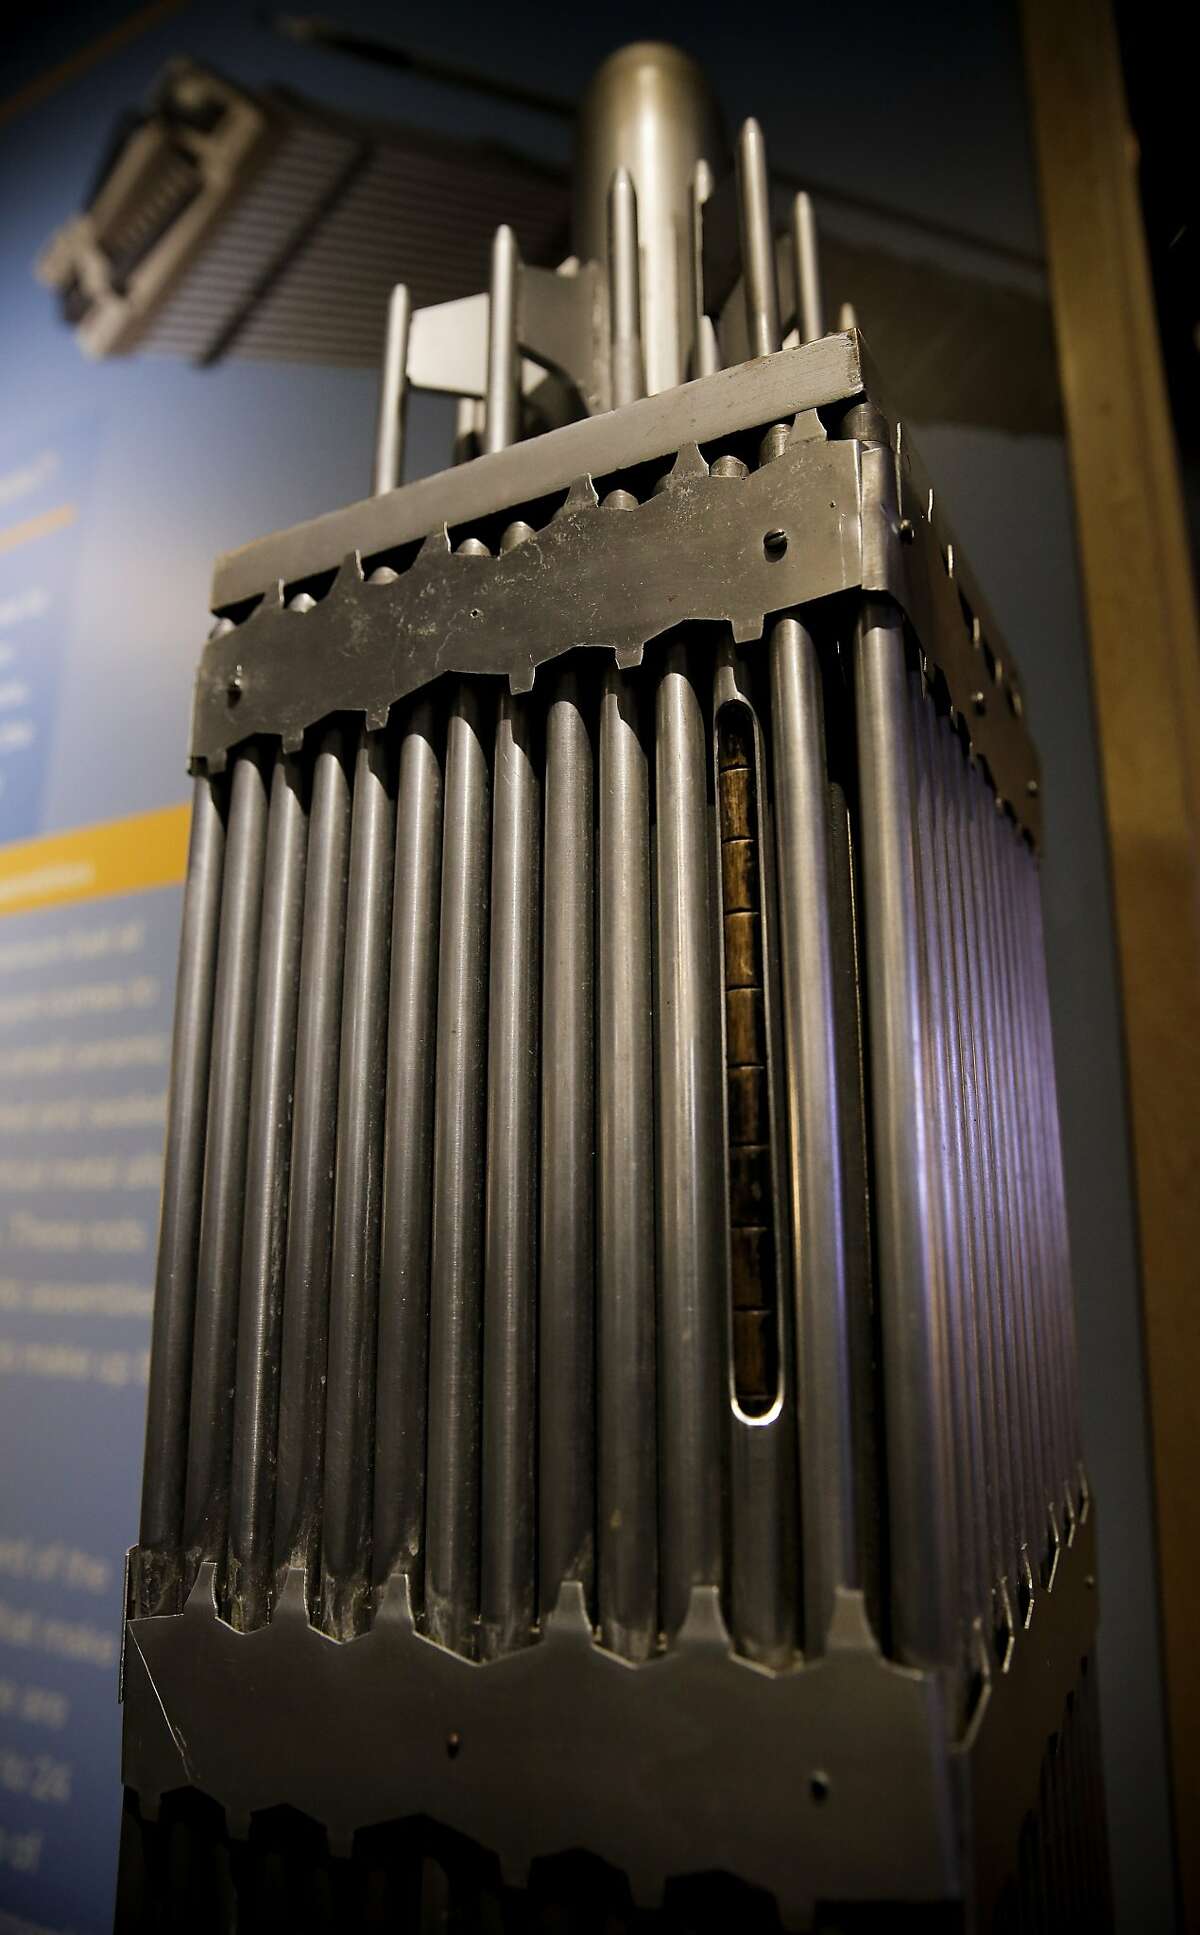 A model of the uranium fuel used in the reactors is seen at the visitors center, which shows the small ceramic pellets inserted and sealed into long,vertical metal alloy tubes or rods, at the Diablo Canyon Nuclear Power plant in San Luis Obispo, Calif., as seen on Tues. March 31, 2015.